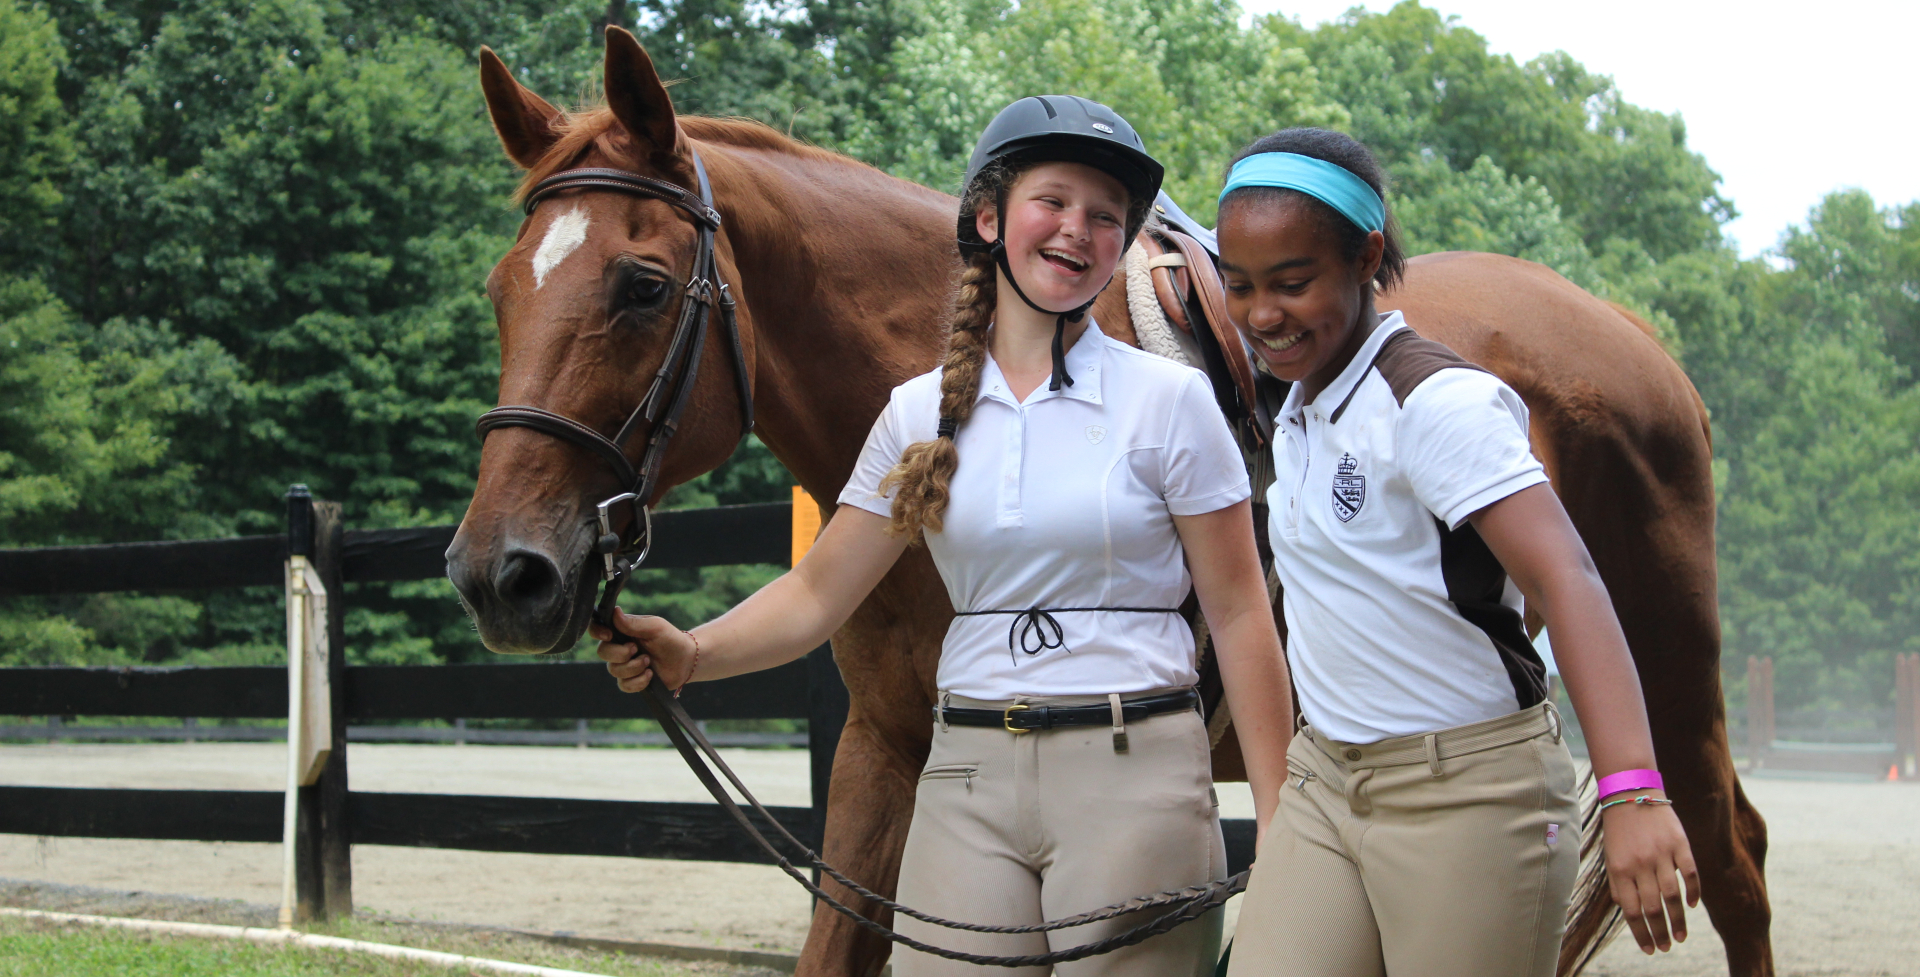 Two Equestrian campers walk with a horse at the Camp Friendship Horse Show